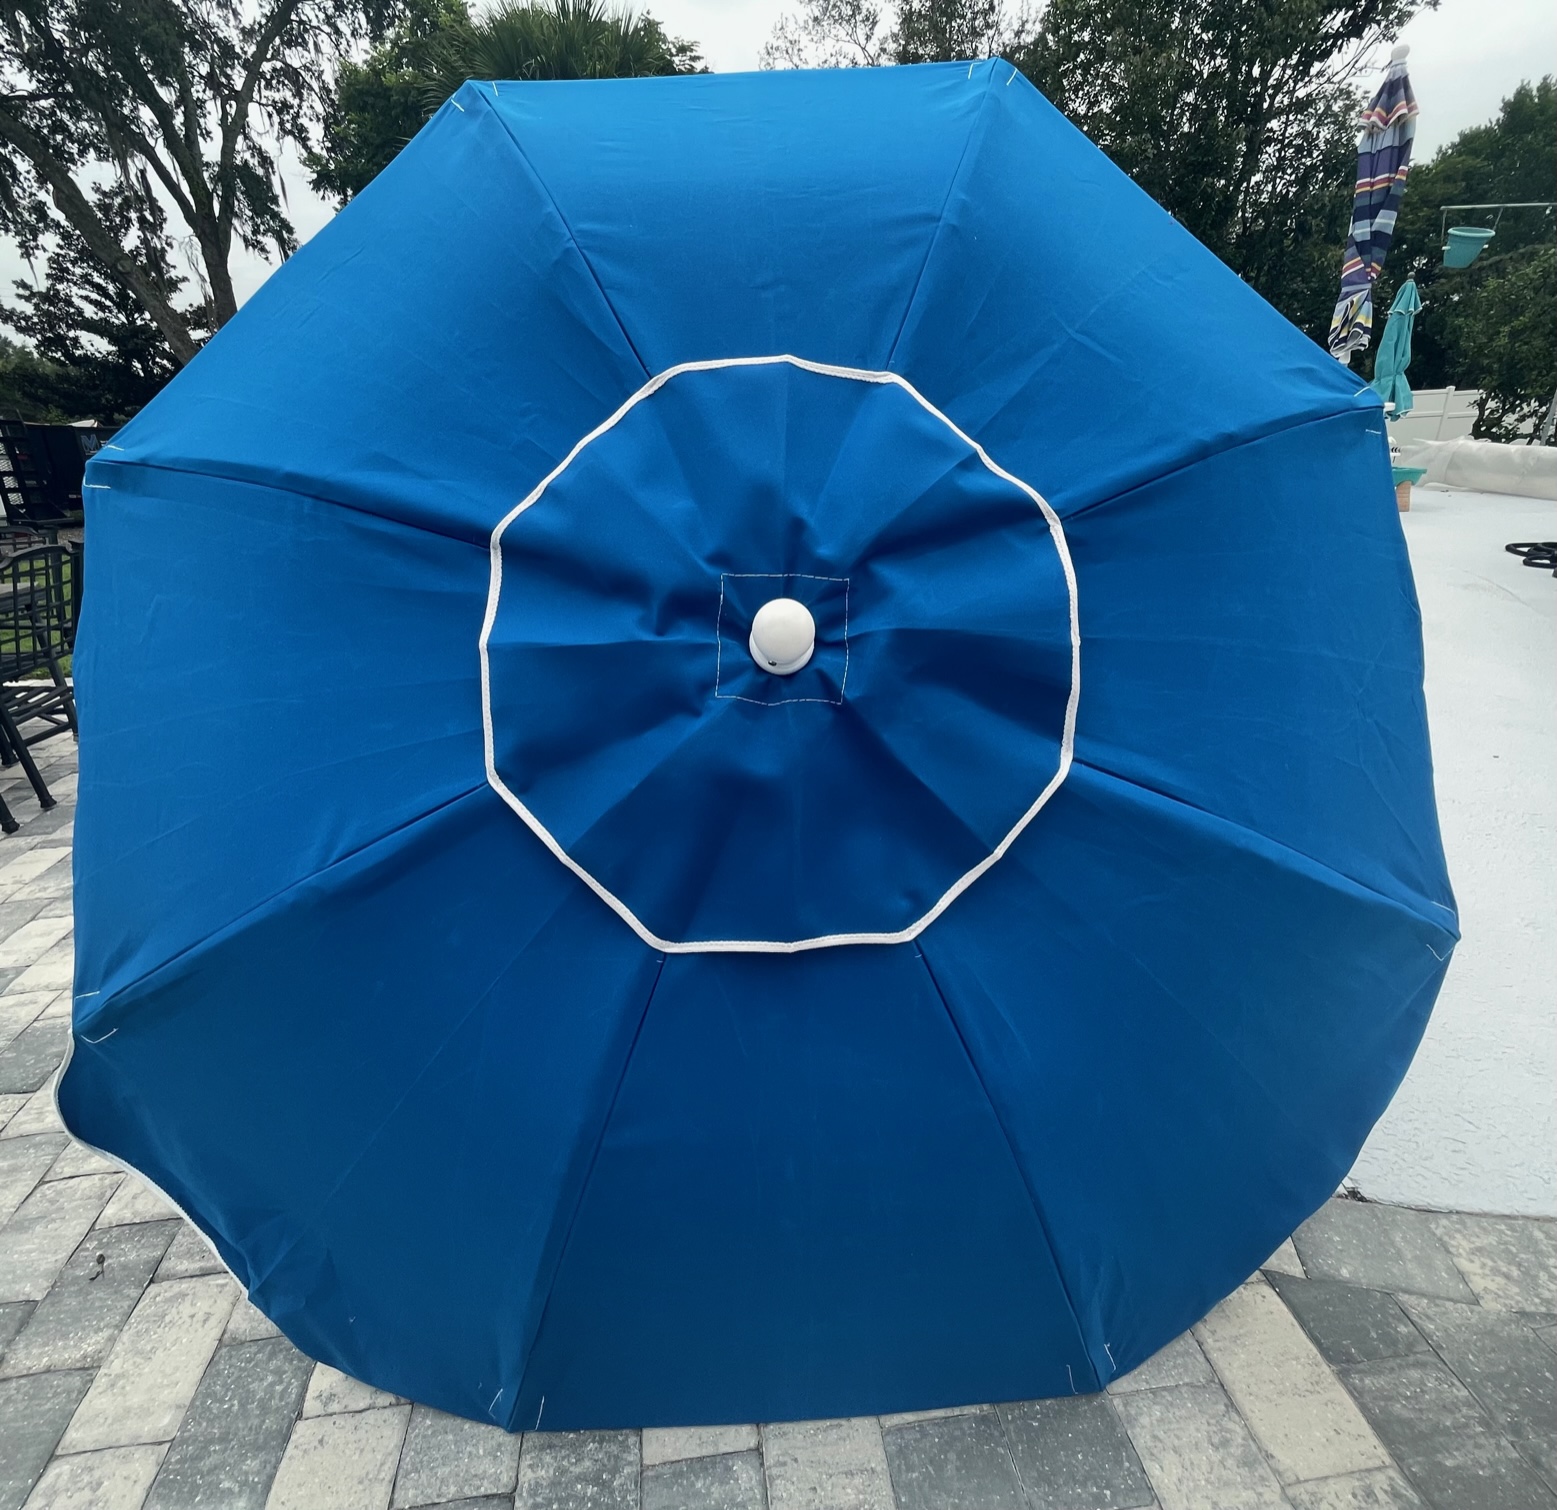 Umbrella for pool and beach